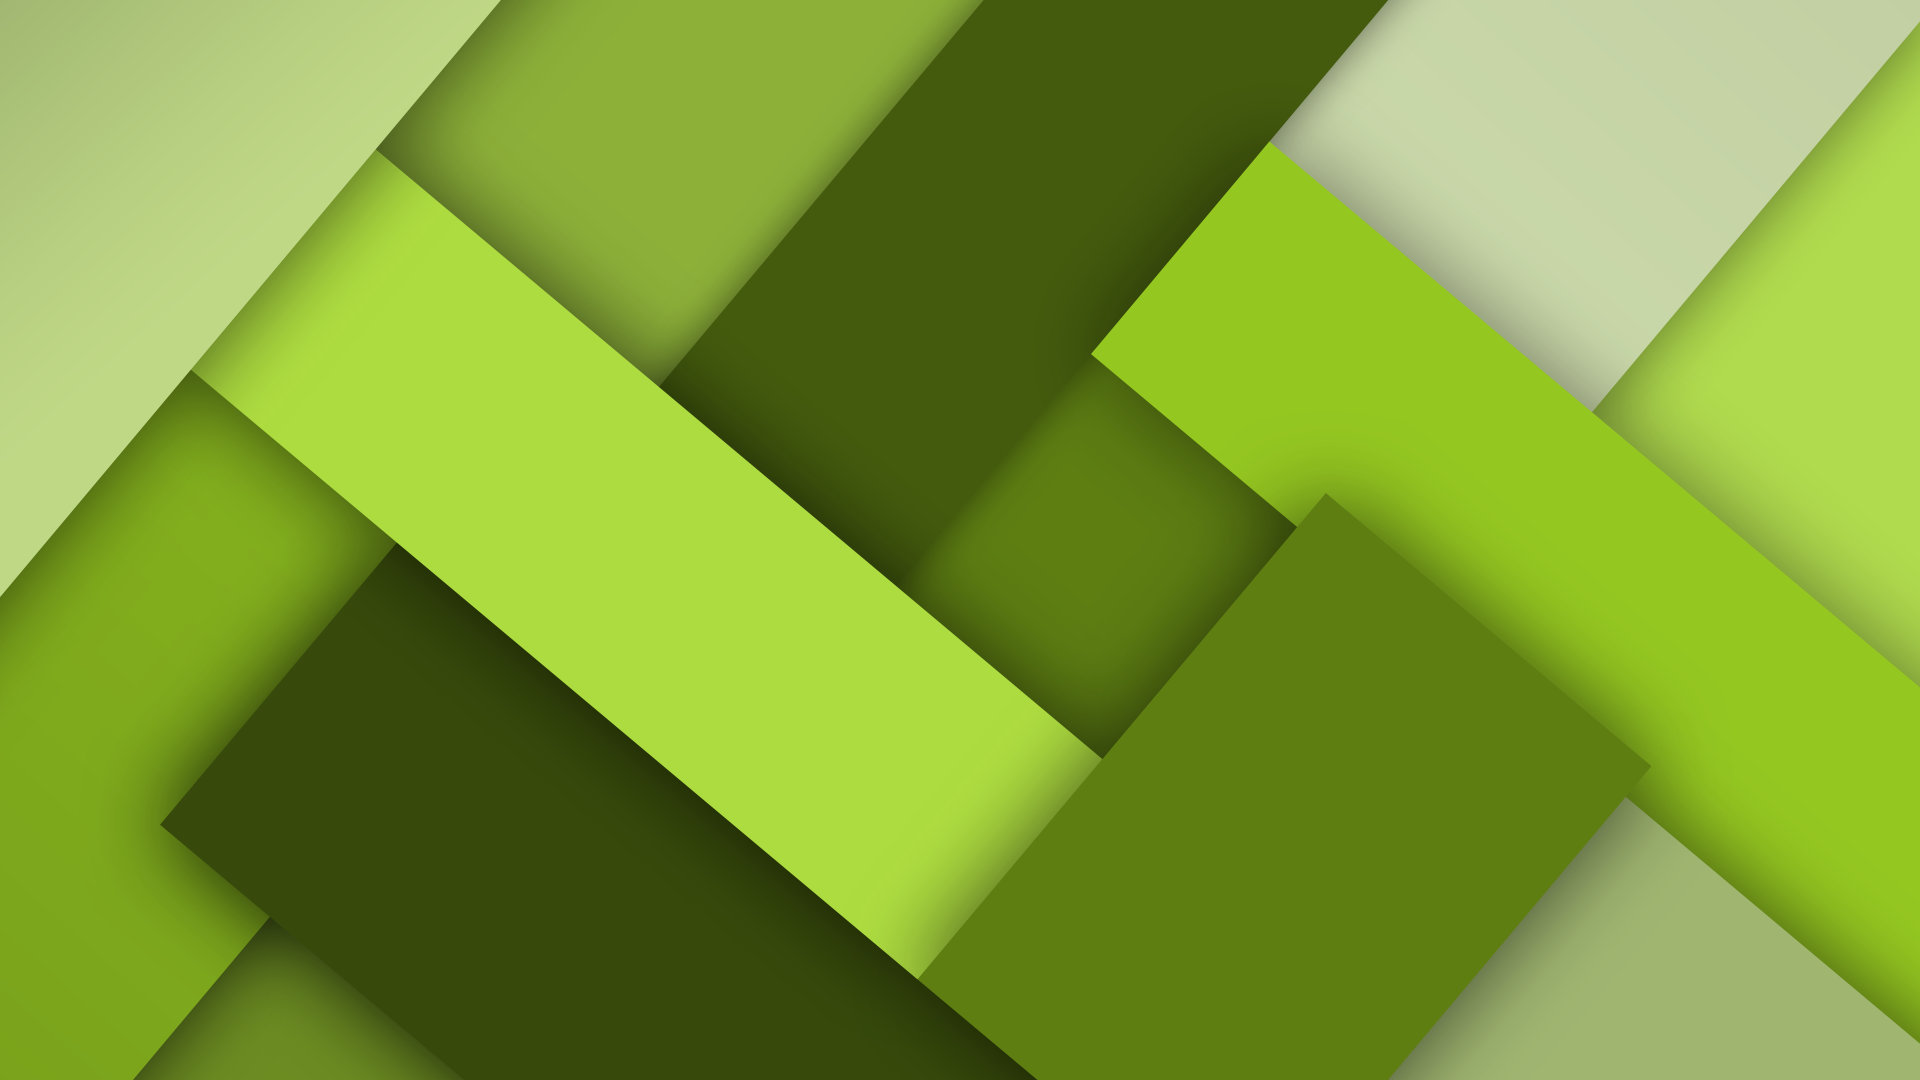 4K Green Abstract Wallpapers